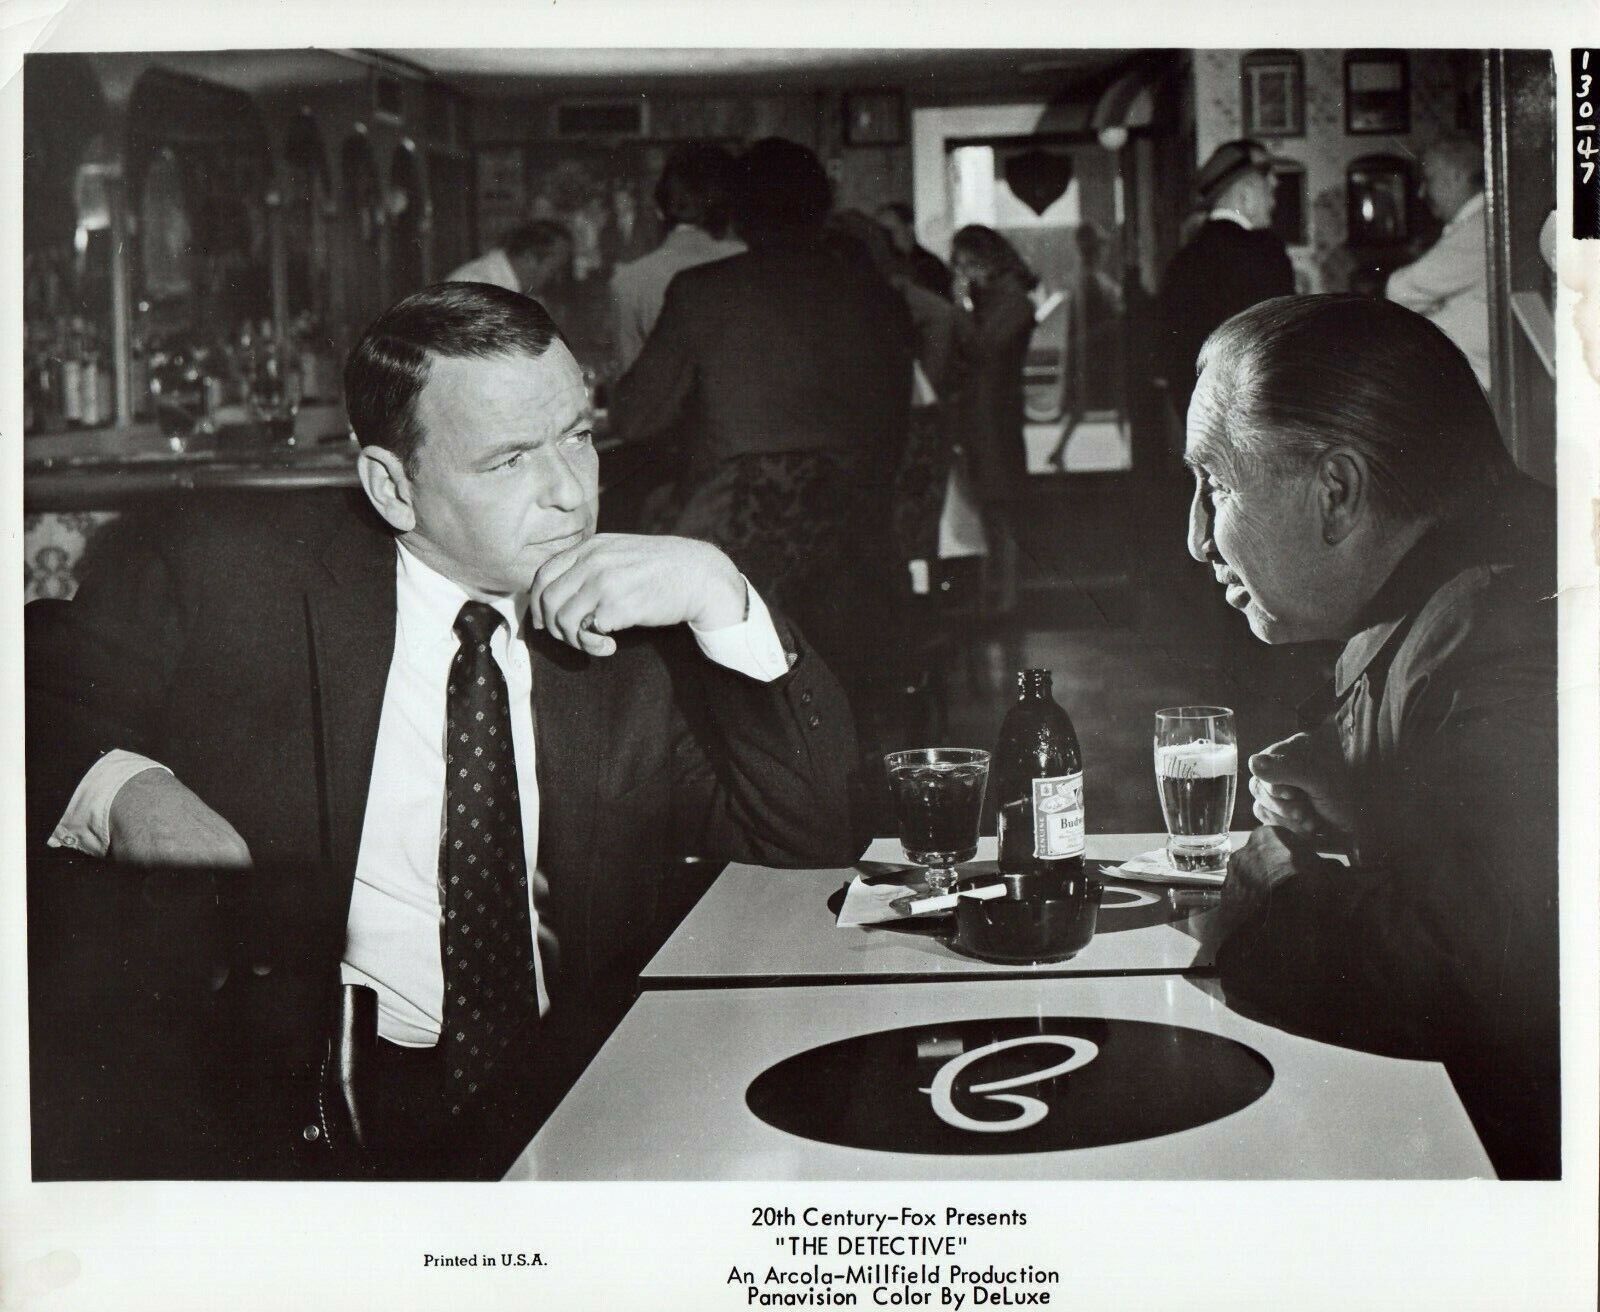 FRANK SINATRA HORACE MCMAHON 1968 Movie Vintage Promo 8x10 Photo Poster painting THE DETECTIVE